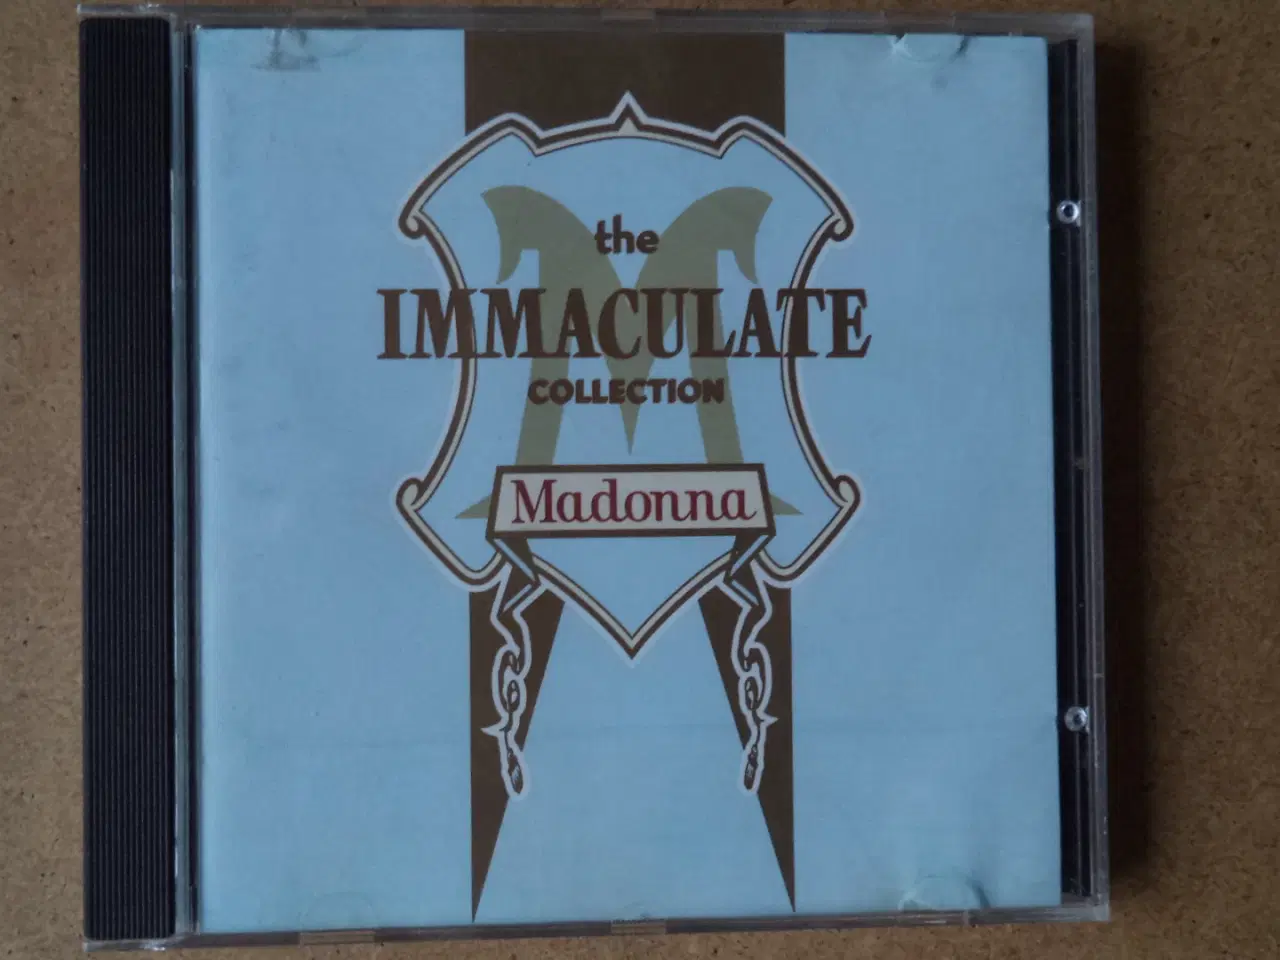 Billede 1 - Madonna ** The Immaculate Collection              